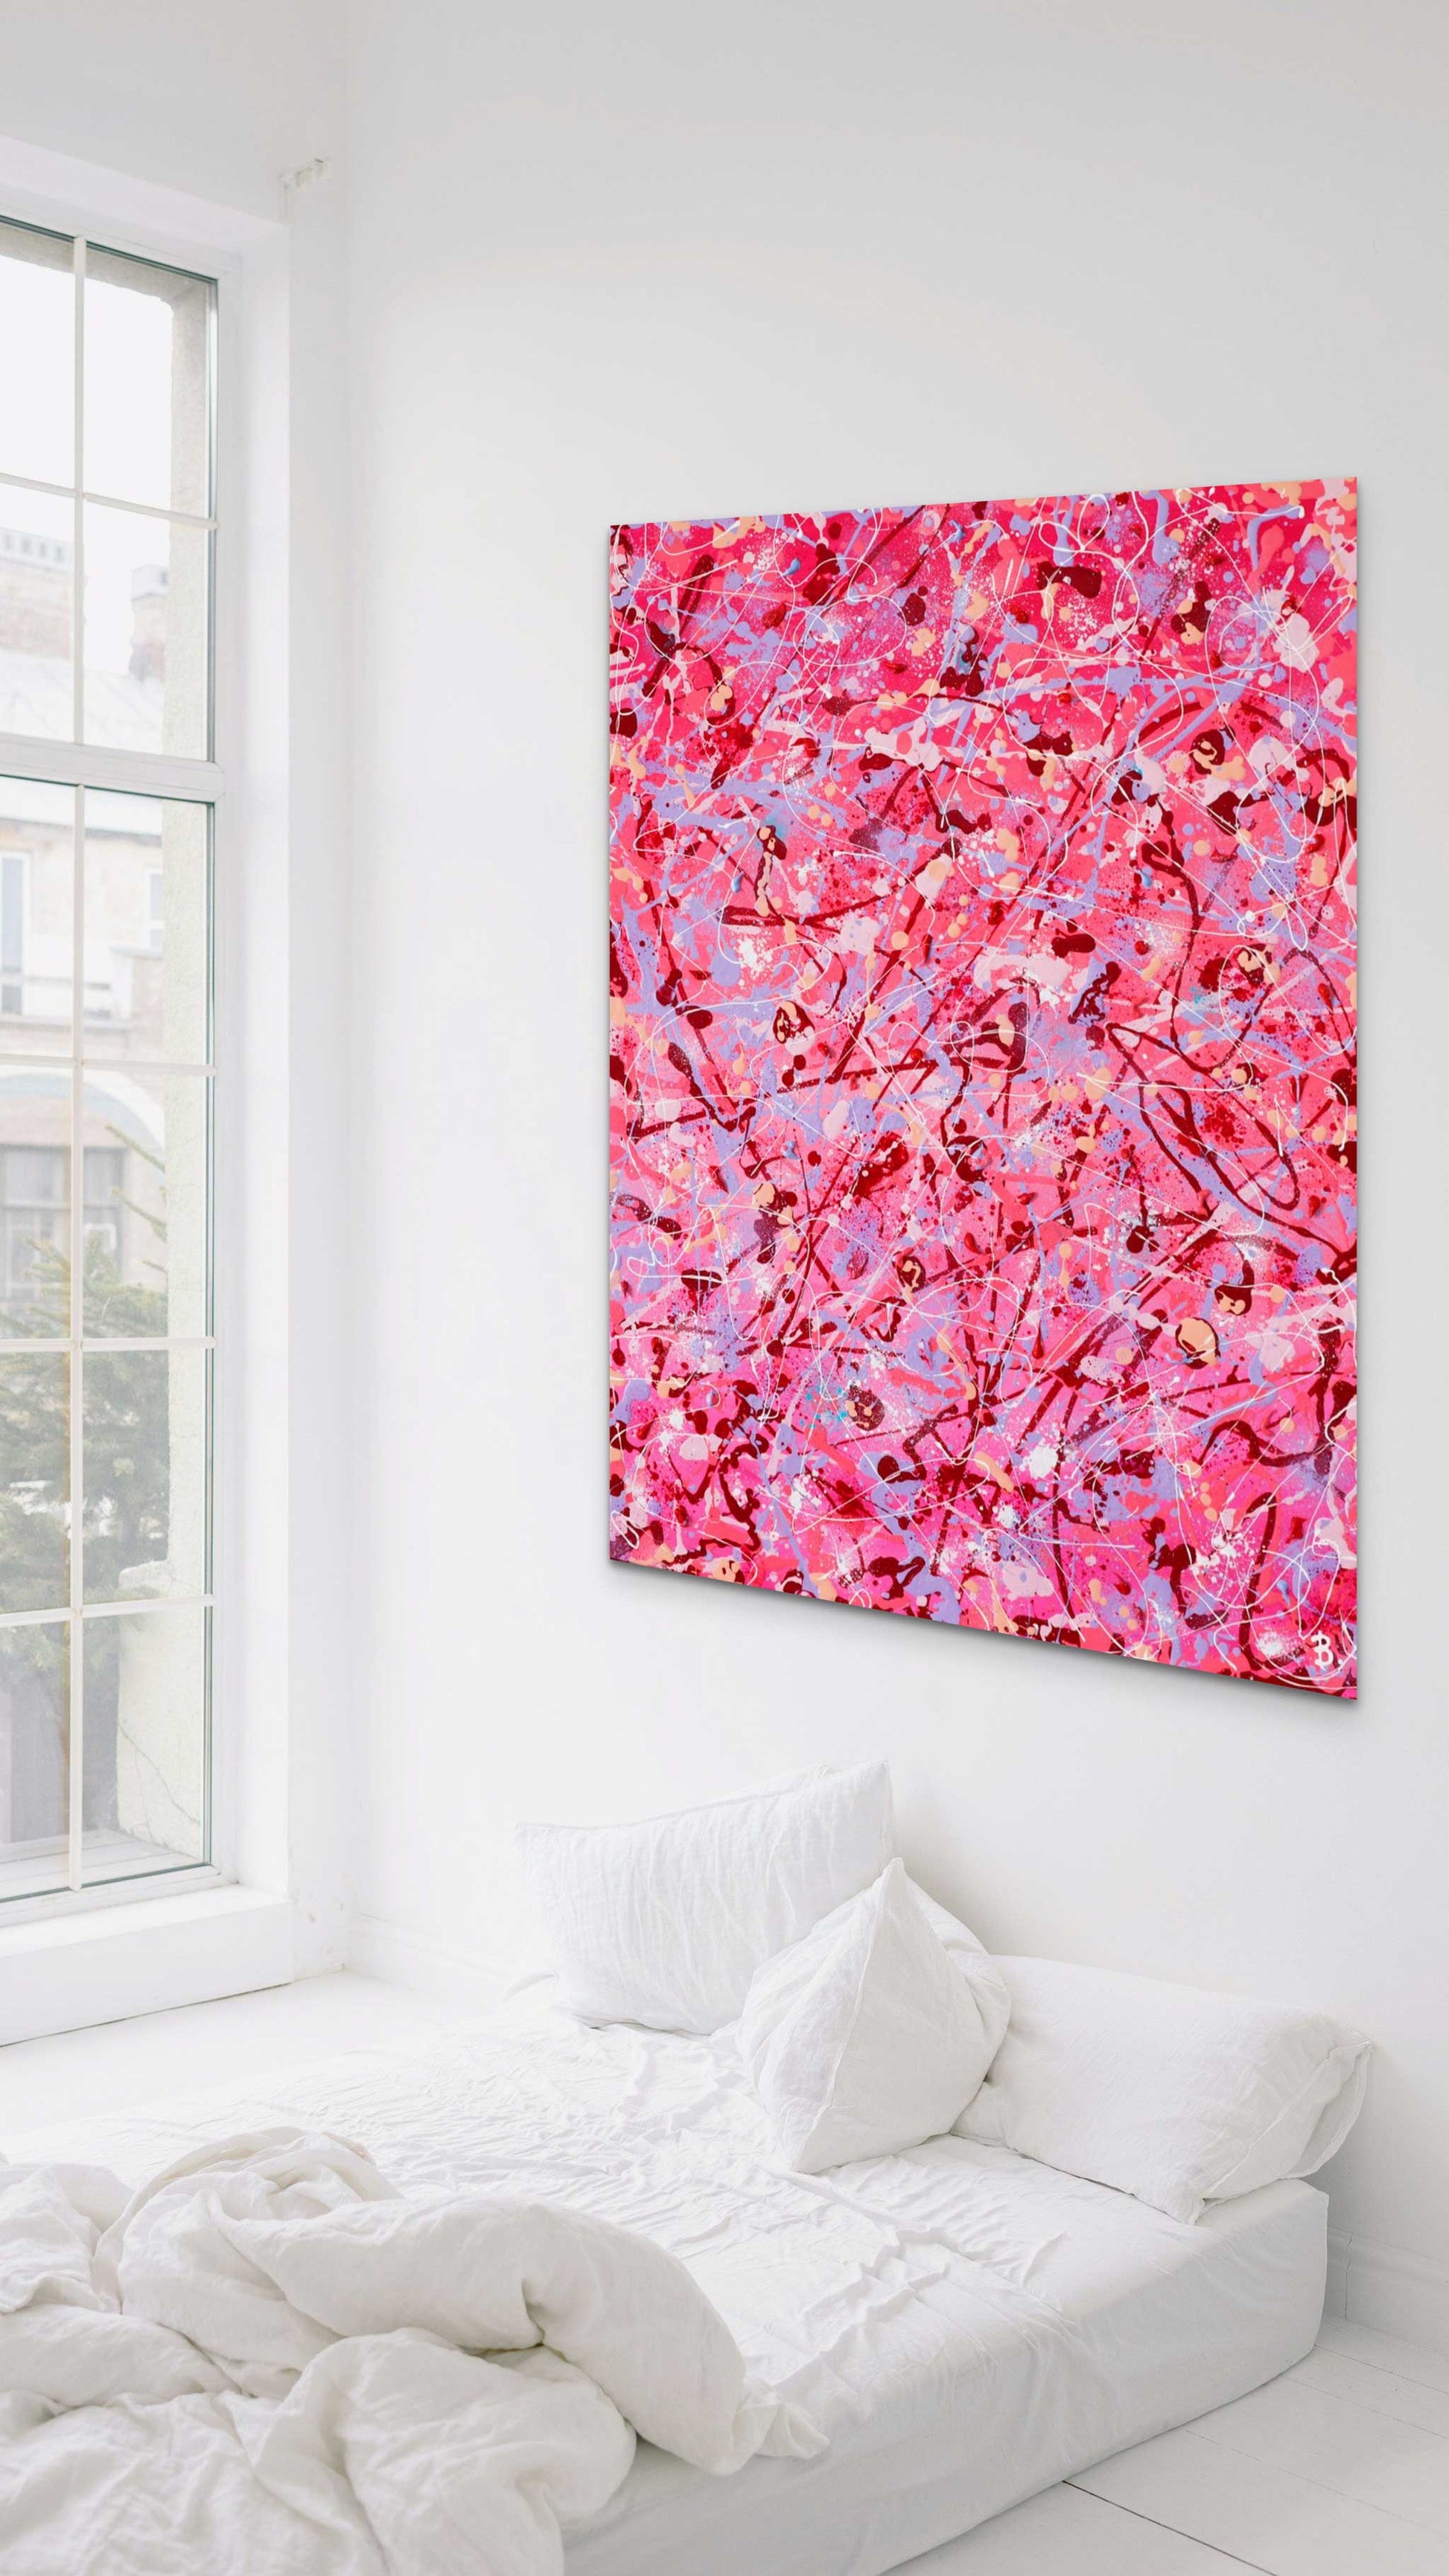 'Self Love' original abstract expressionism paitning hanging on white wall with white decor. Painted by Bridget Bradley, Abstract Artist, Australia